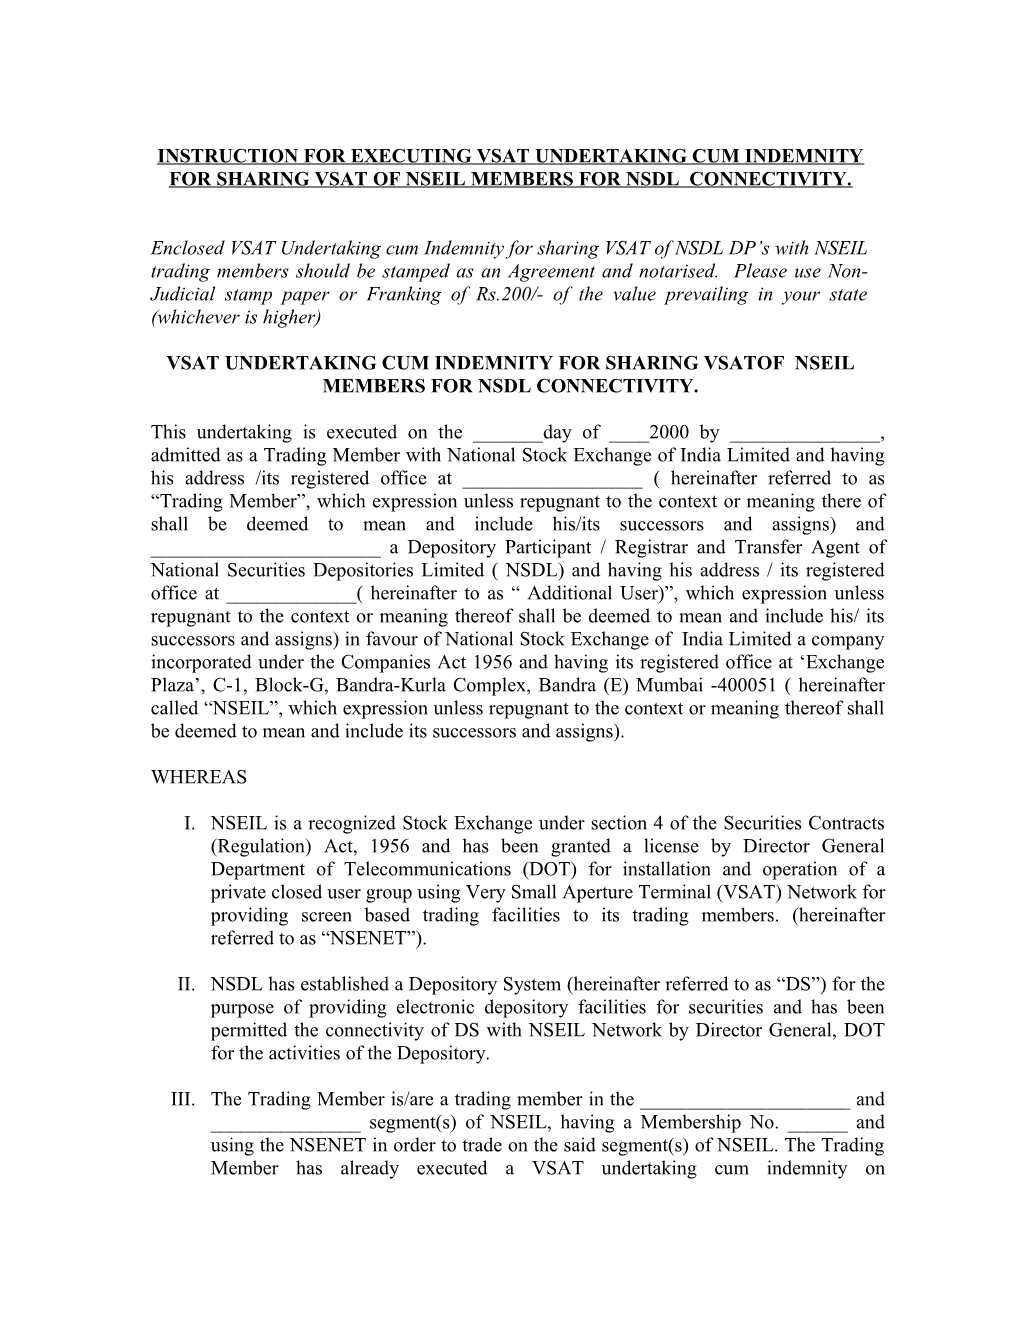 Instruction for Executing Vsat Undertaking Cum Indemnity for Sharing Vsat of Nseil Members